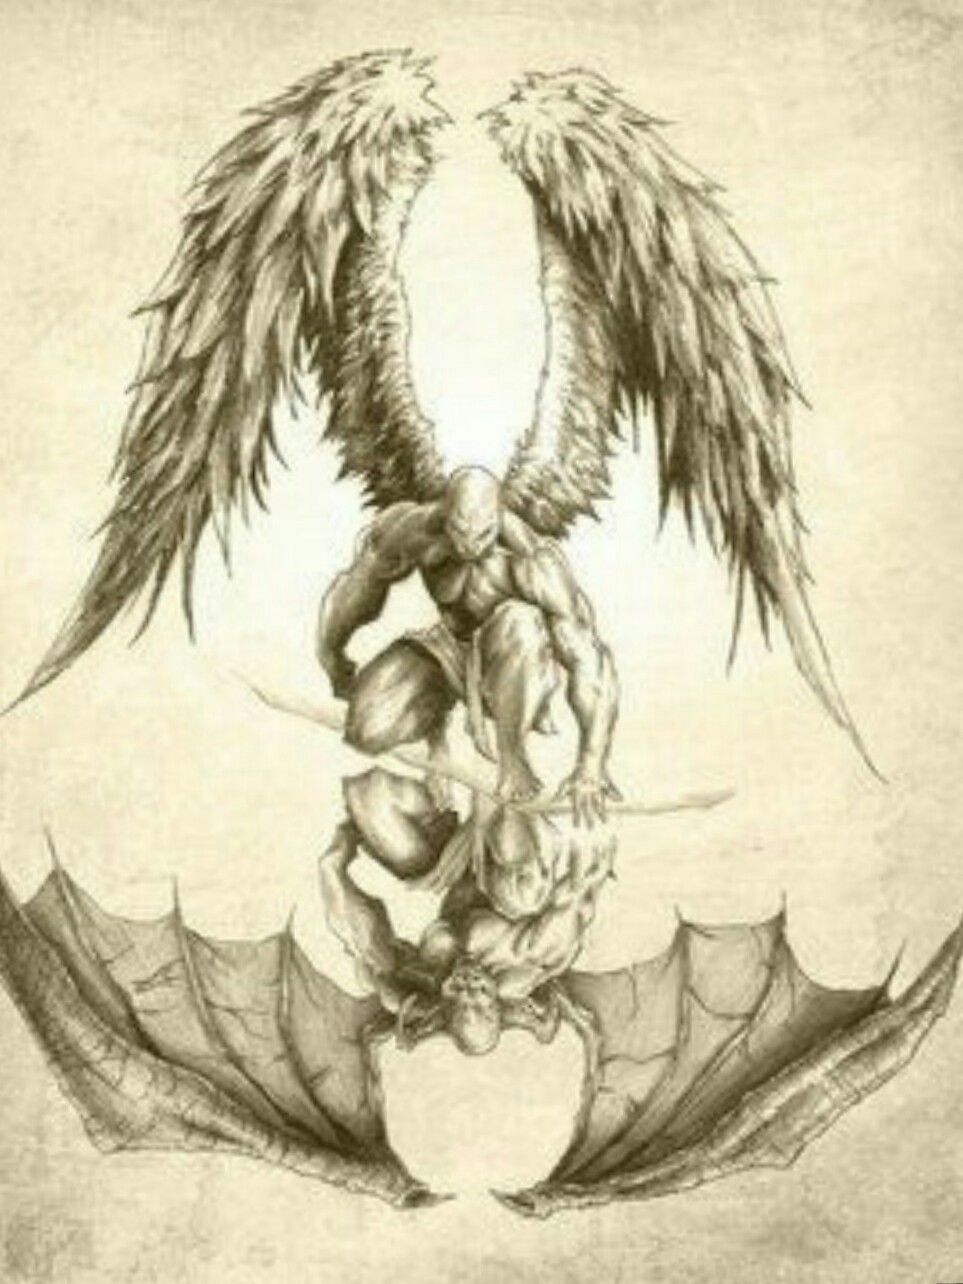 black and grey realistic angel and demon tattoo